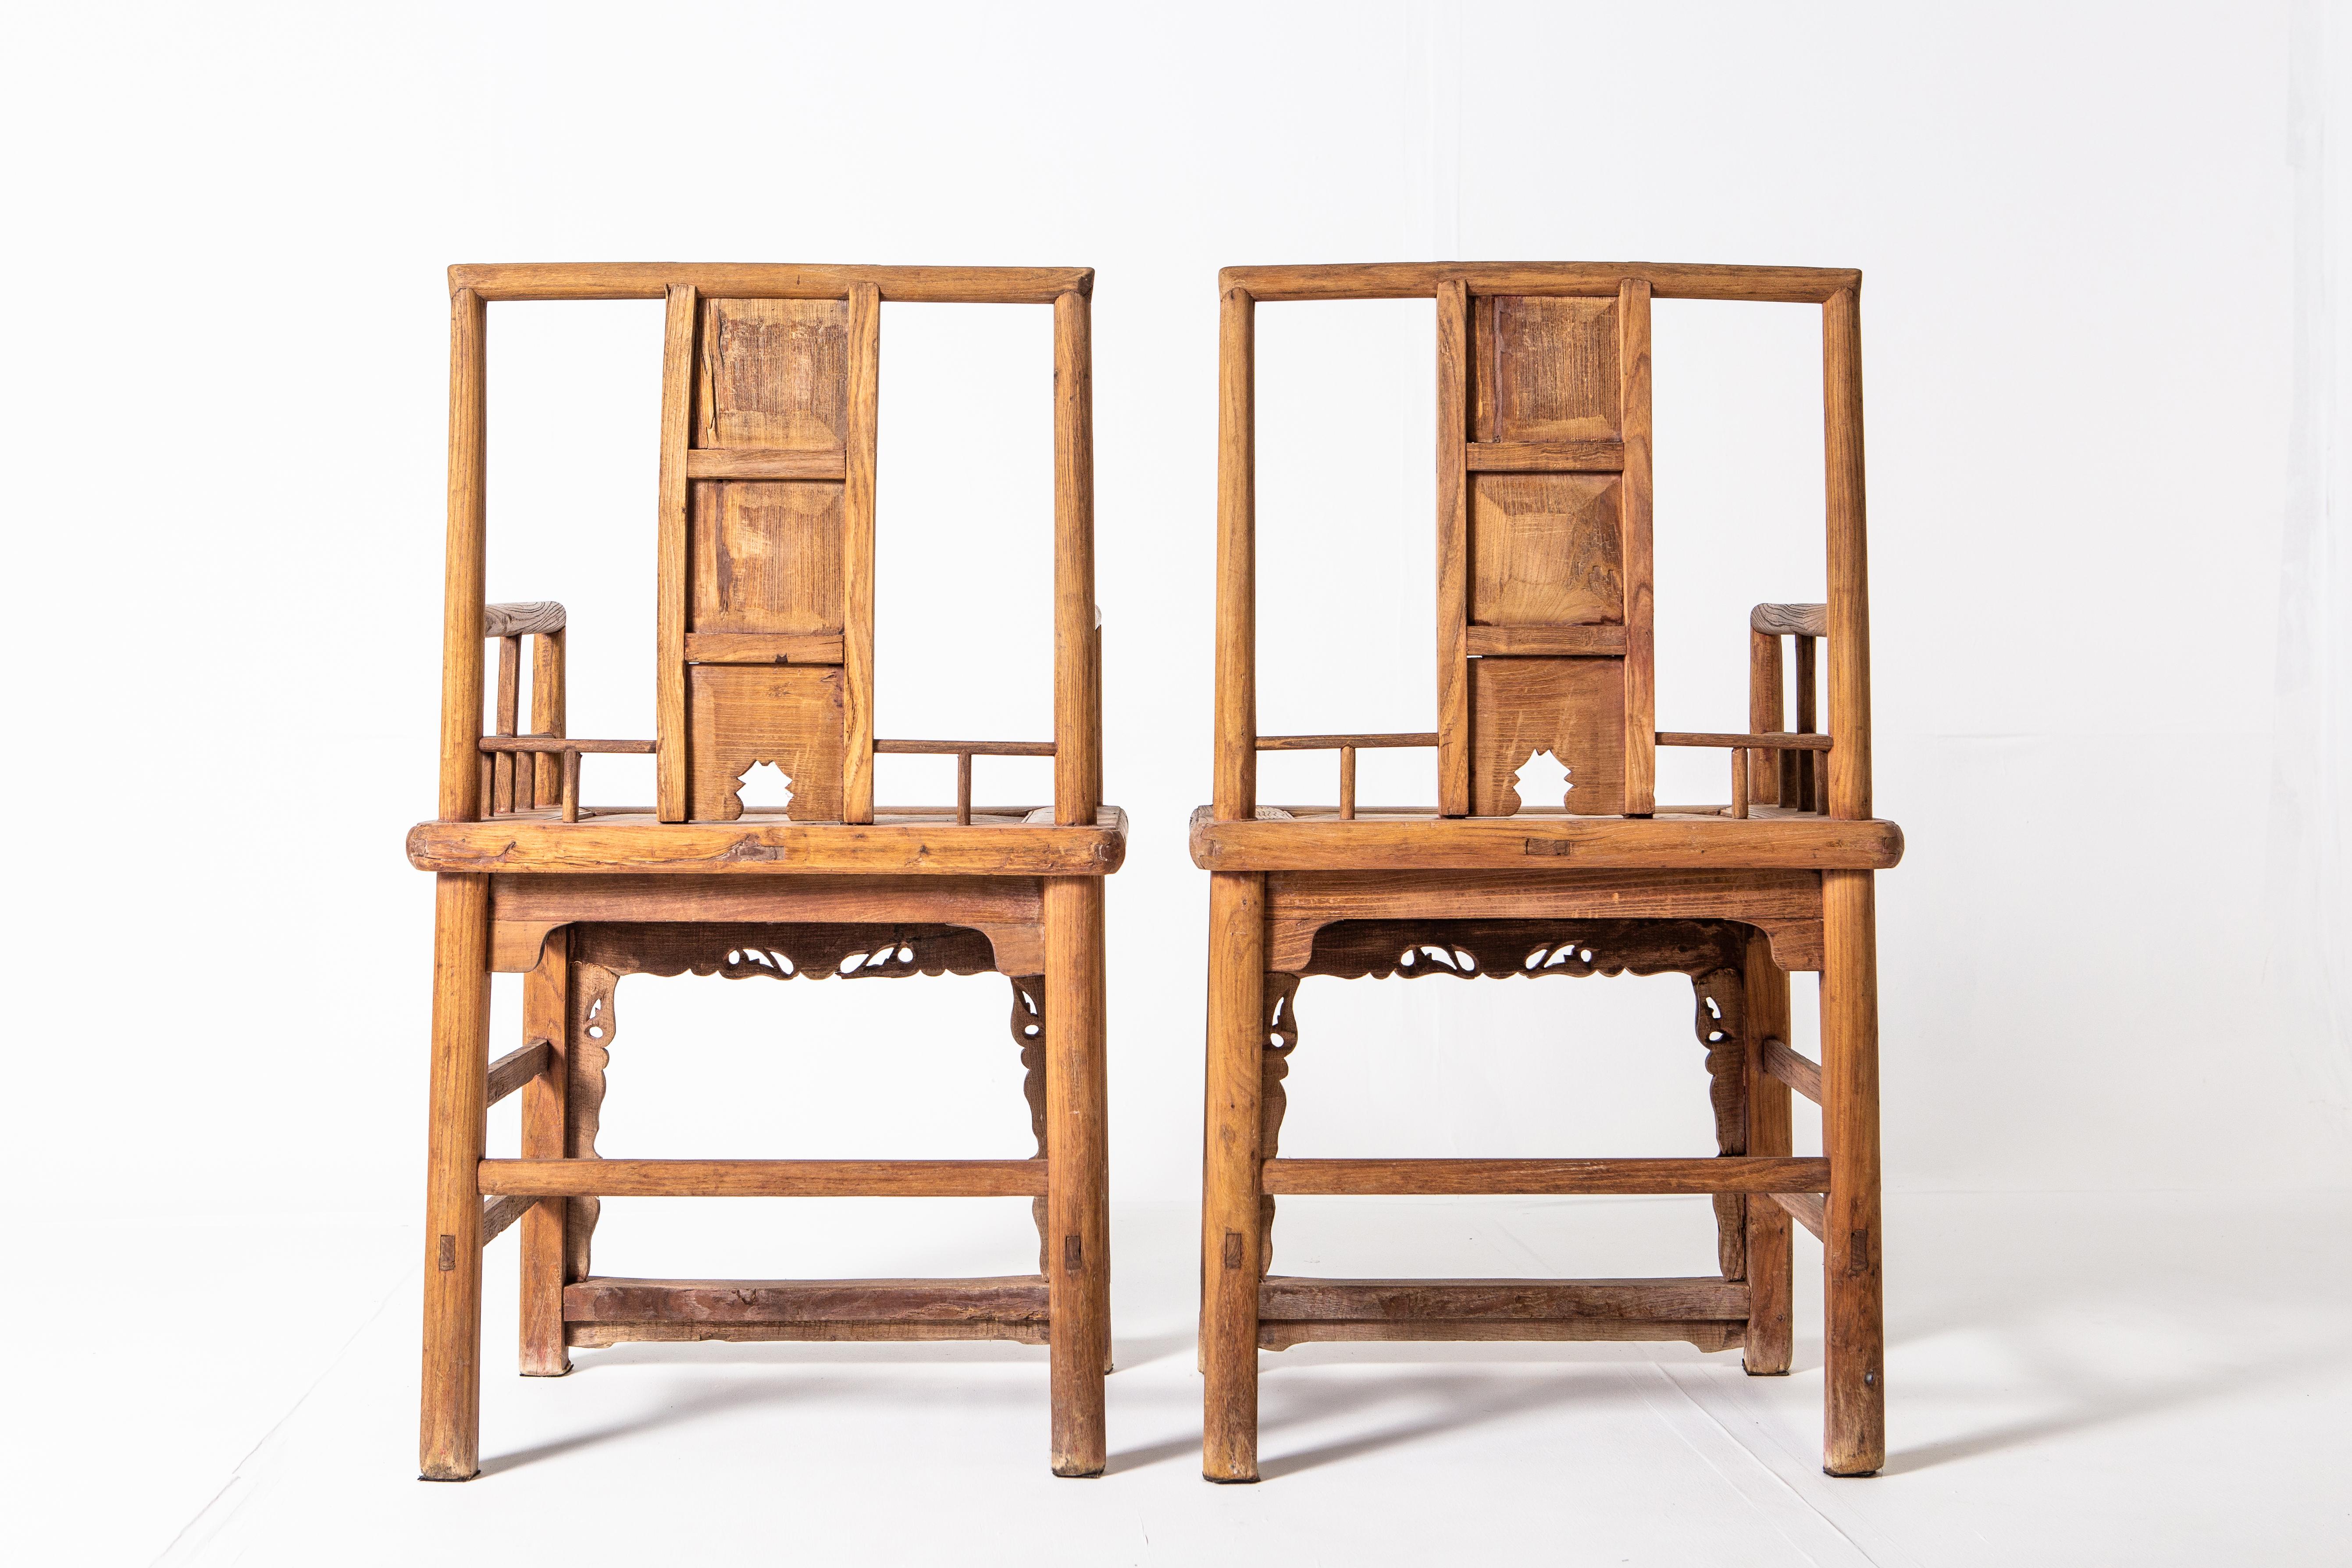 These beautiful elm wood chairs feature a rounded frame construction with intricately carved Chinese motifs. Dating back to the late-Qing dynasty, the honey color of the elm and the weathered feet shows a beautifully aged patina.